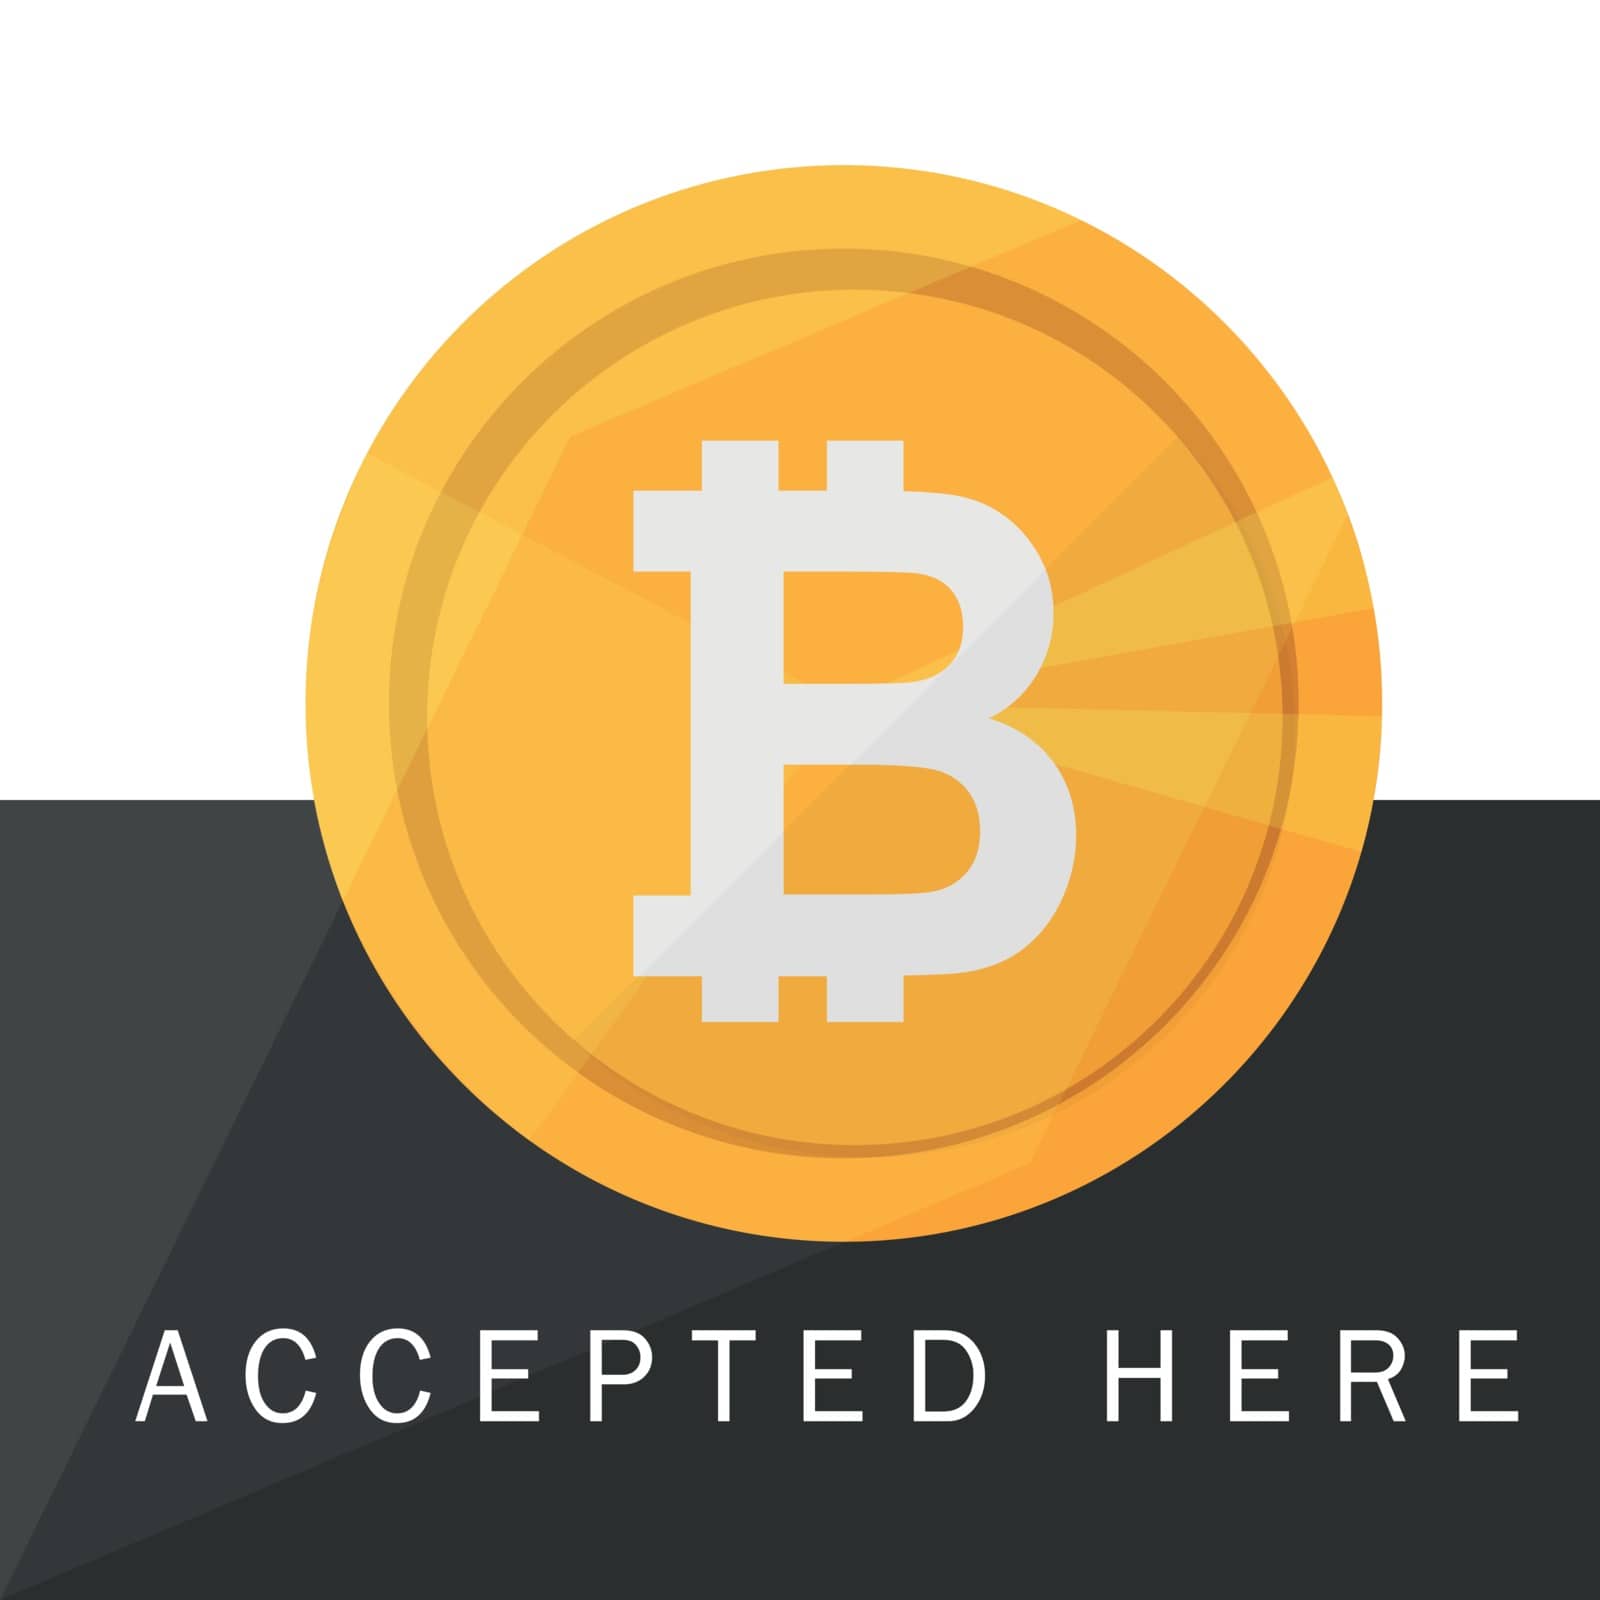 Bitcoin accepted sticker icon banner with text bitcoind accepted here Vector illustration EPS-10 on black and white background